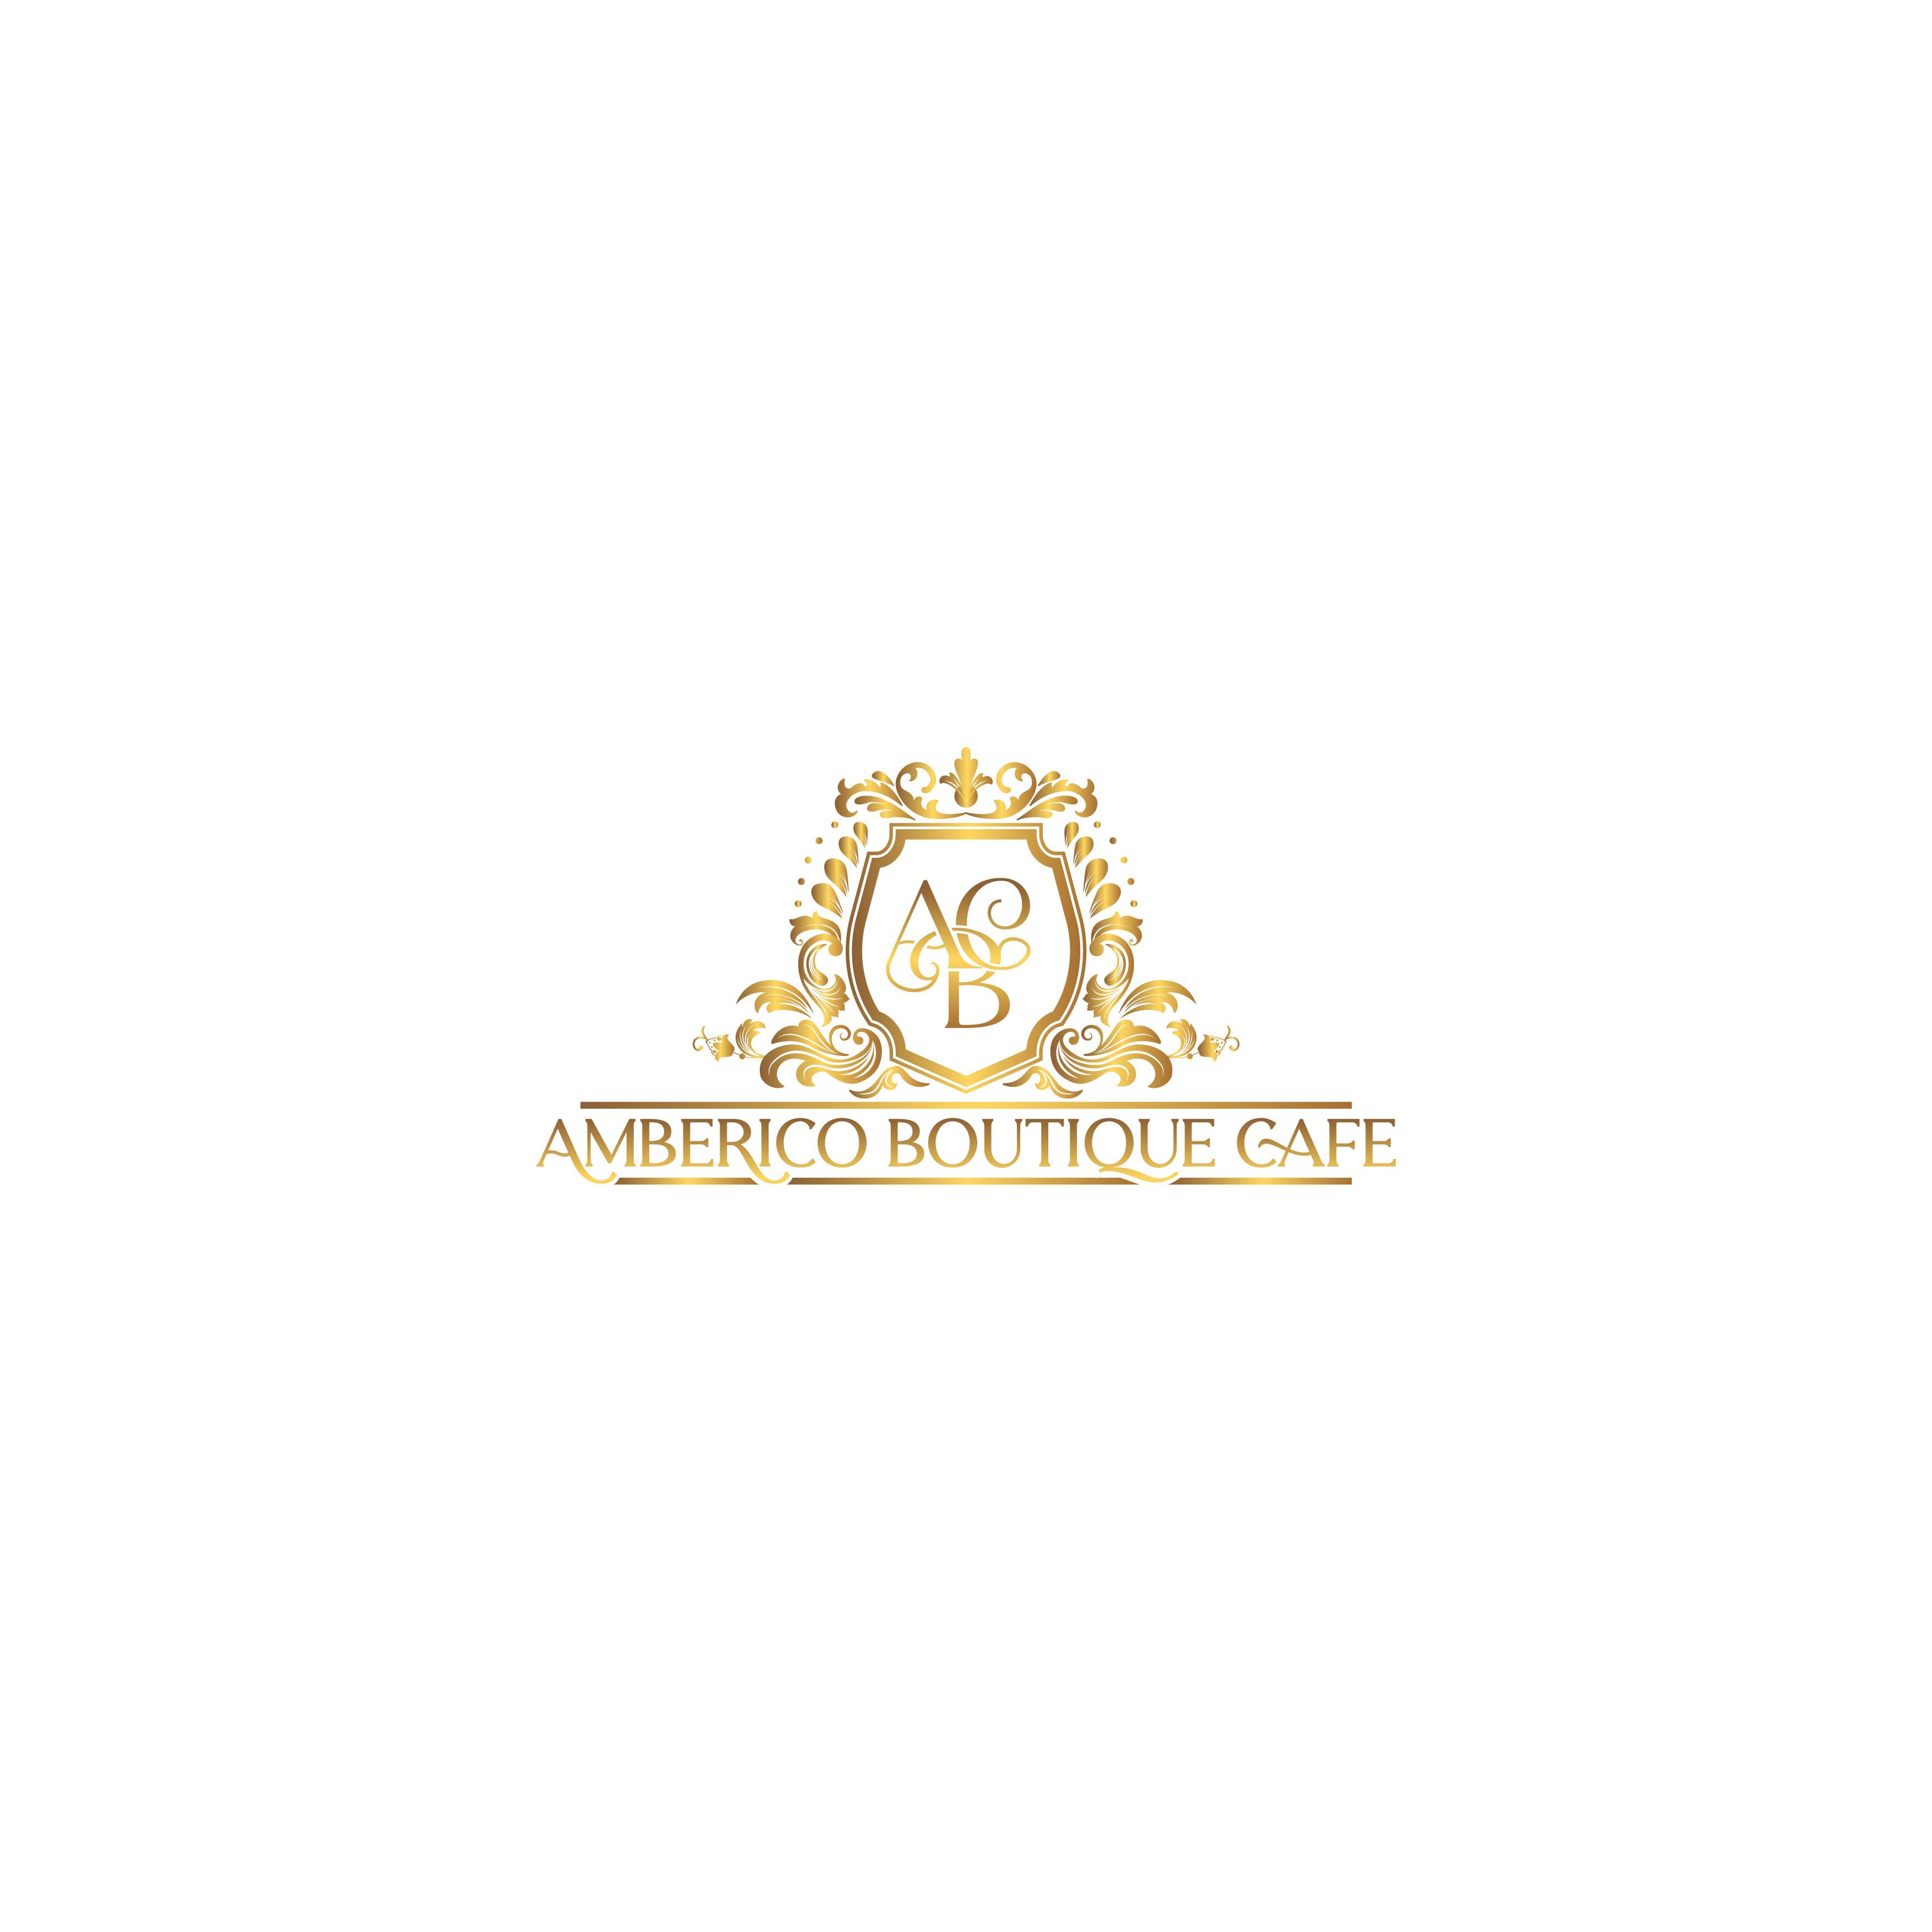 Logo Amberico Boutique Cafe Inh. LAURA RITTER